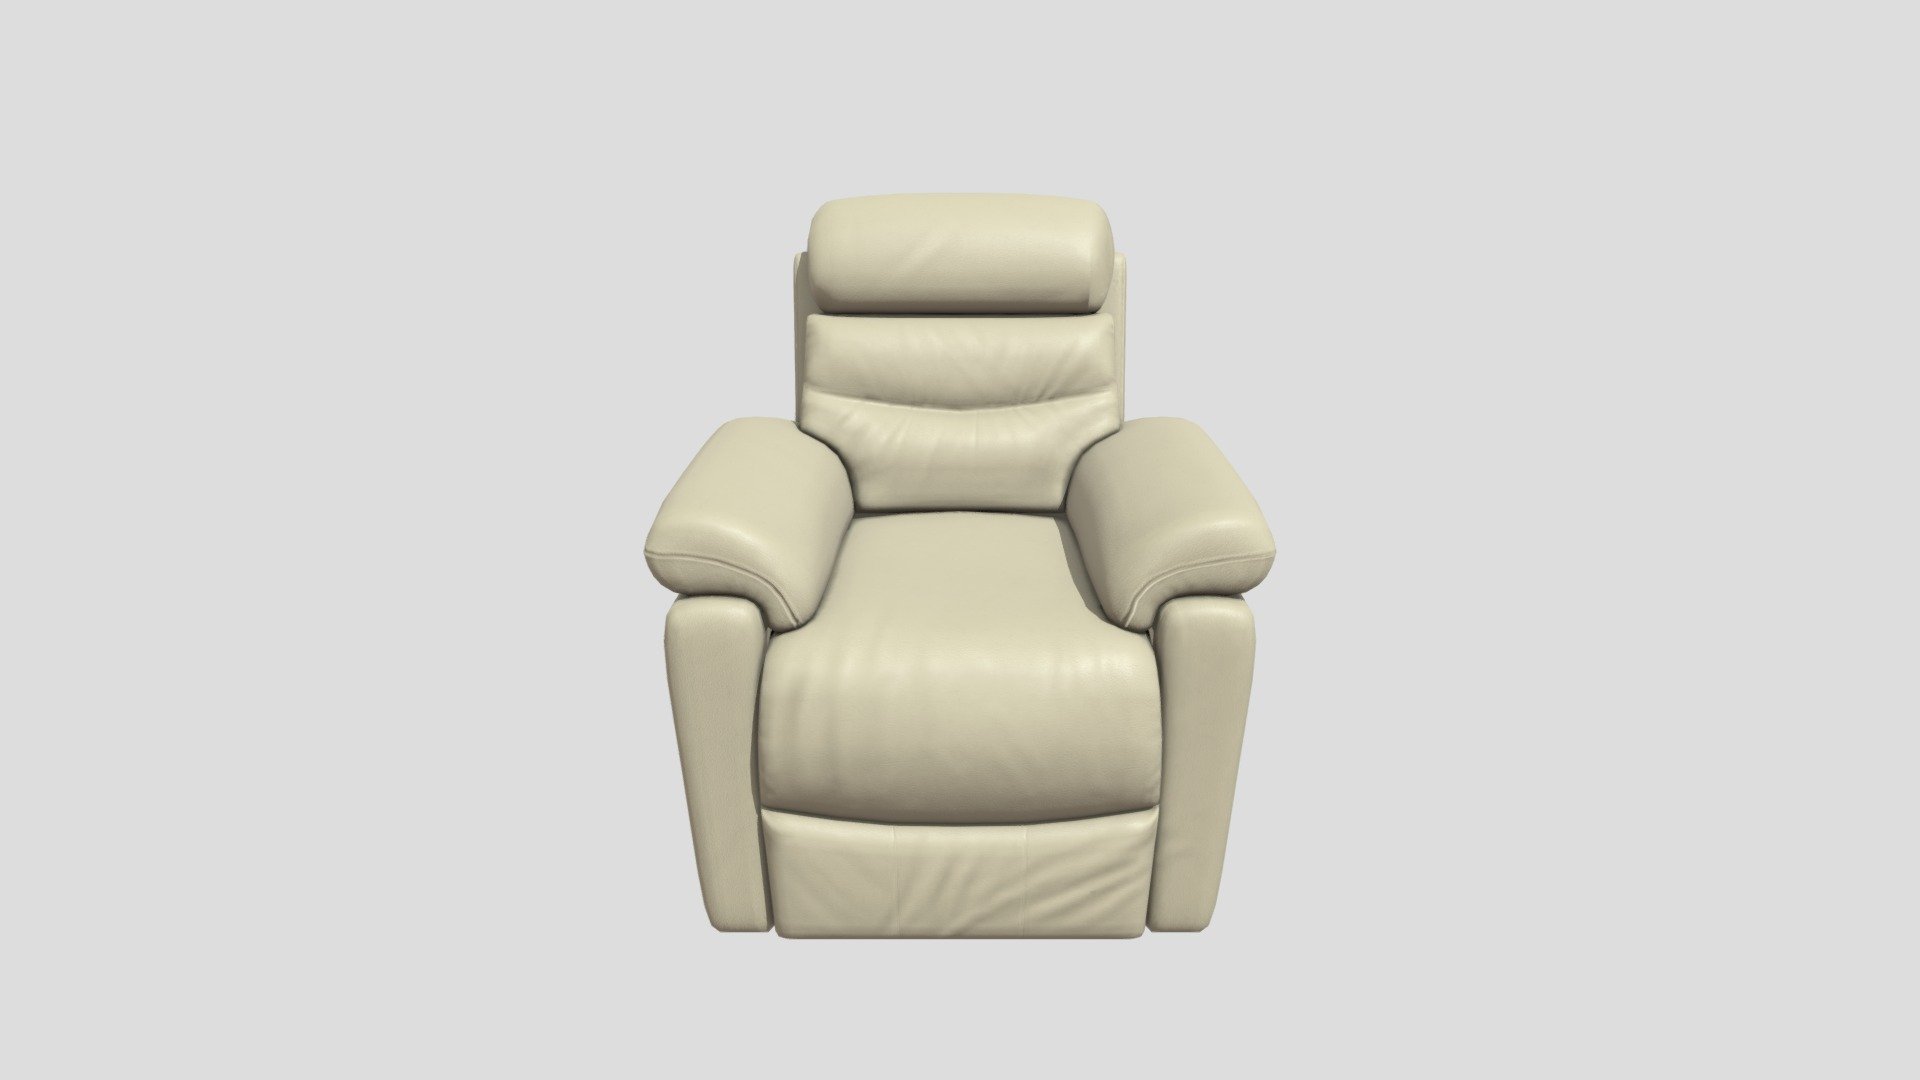 360° swivel and reclining function allow personalized comfort
Beautiful appearance makes a statement in any room 
where it resides
[Comfortable] Padded cushion firm yet soft for ultimate 
Durable legs make for firm foundation
Contemporary design gives product elegance and class
 - leather Massage Chair - 3D model by Hexa (@hexa_partner) 3d model